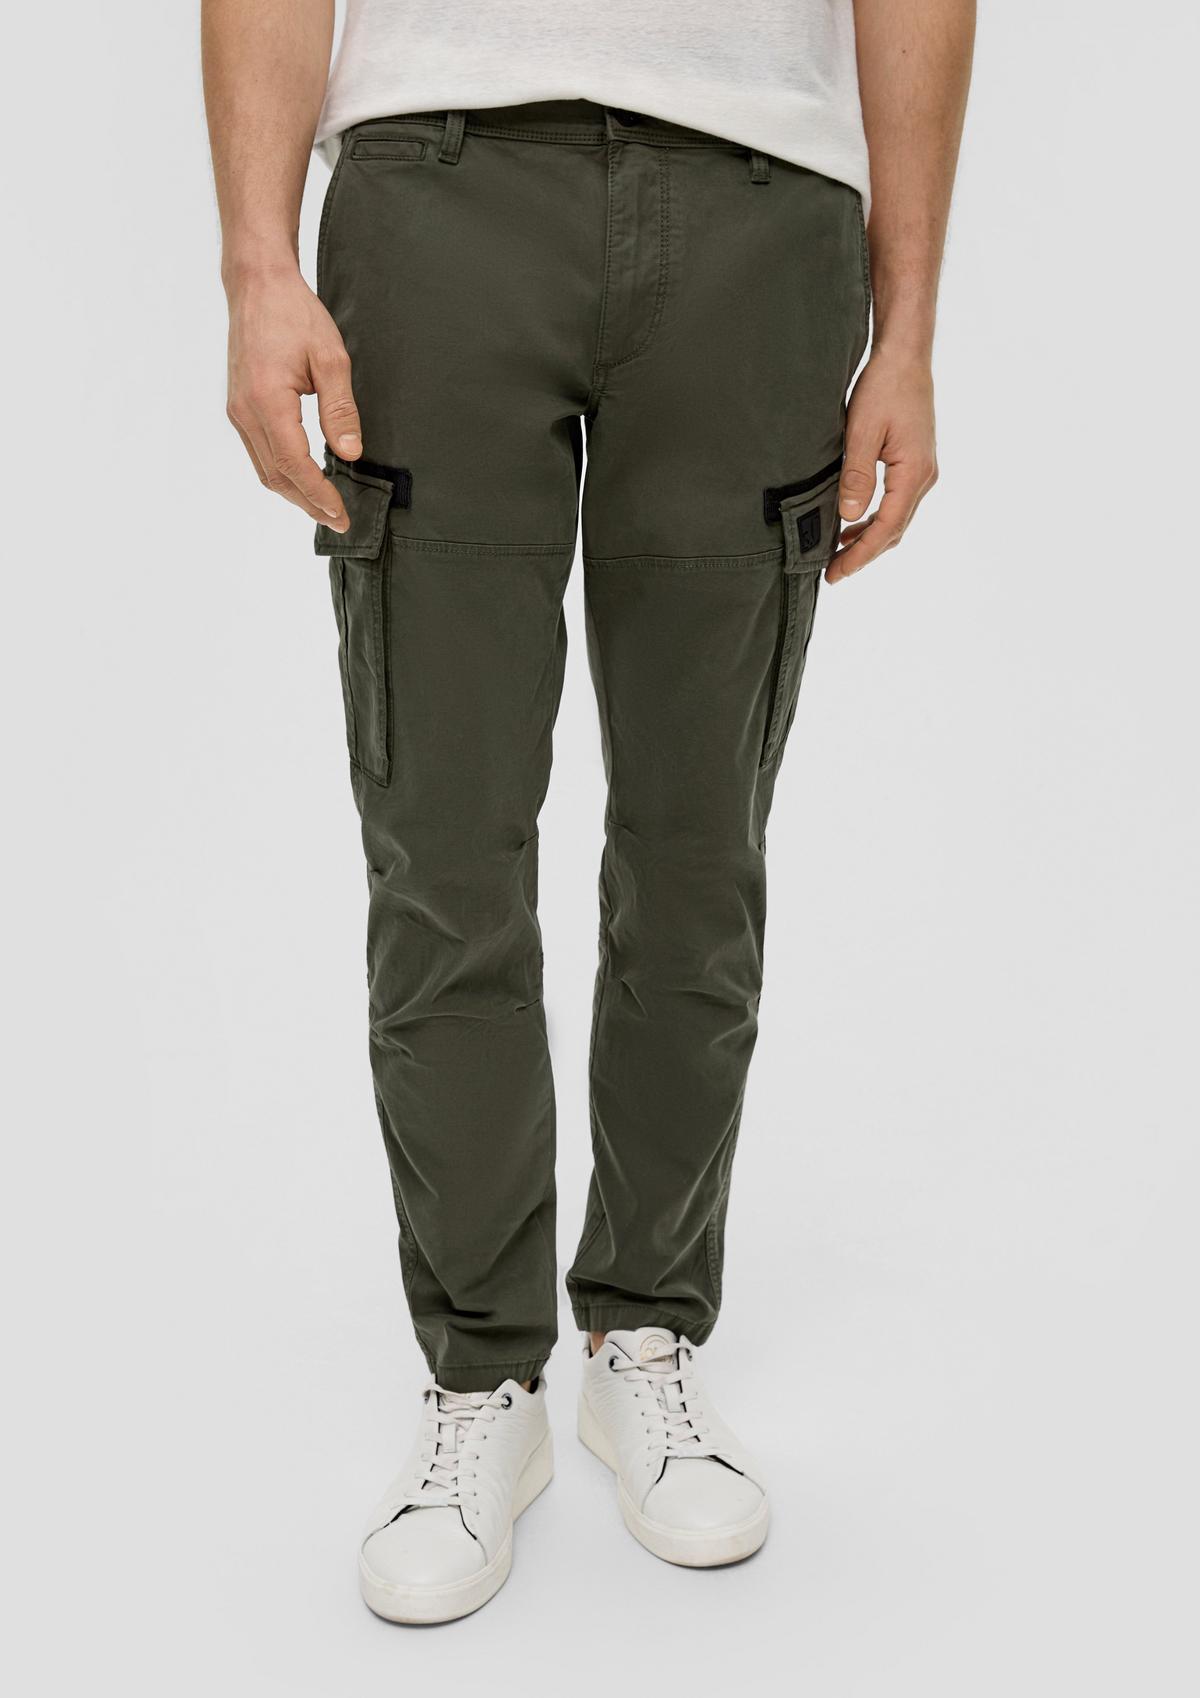 s.Oliver Phoenix: cargo trousers with a slim leg